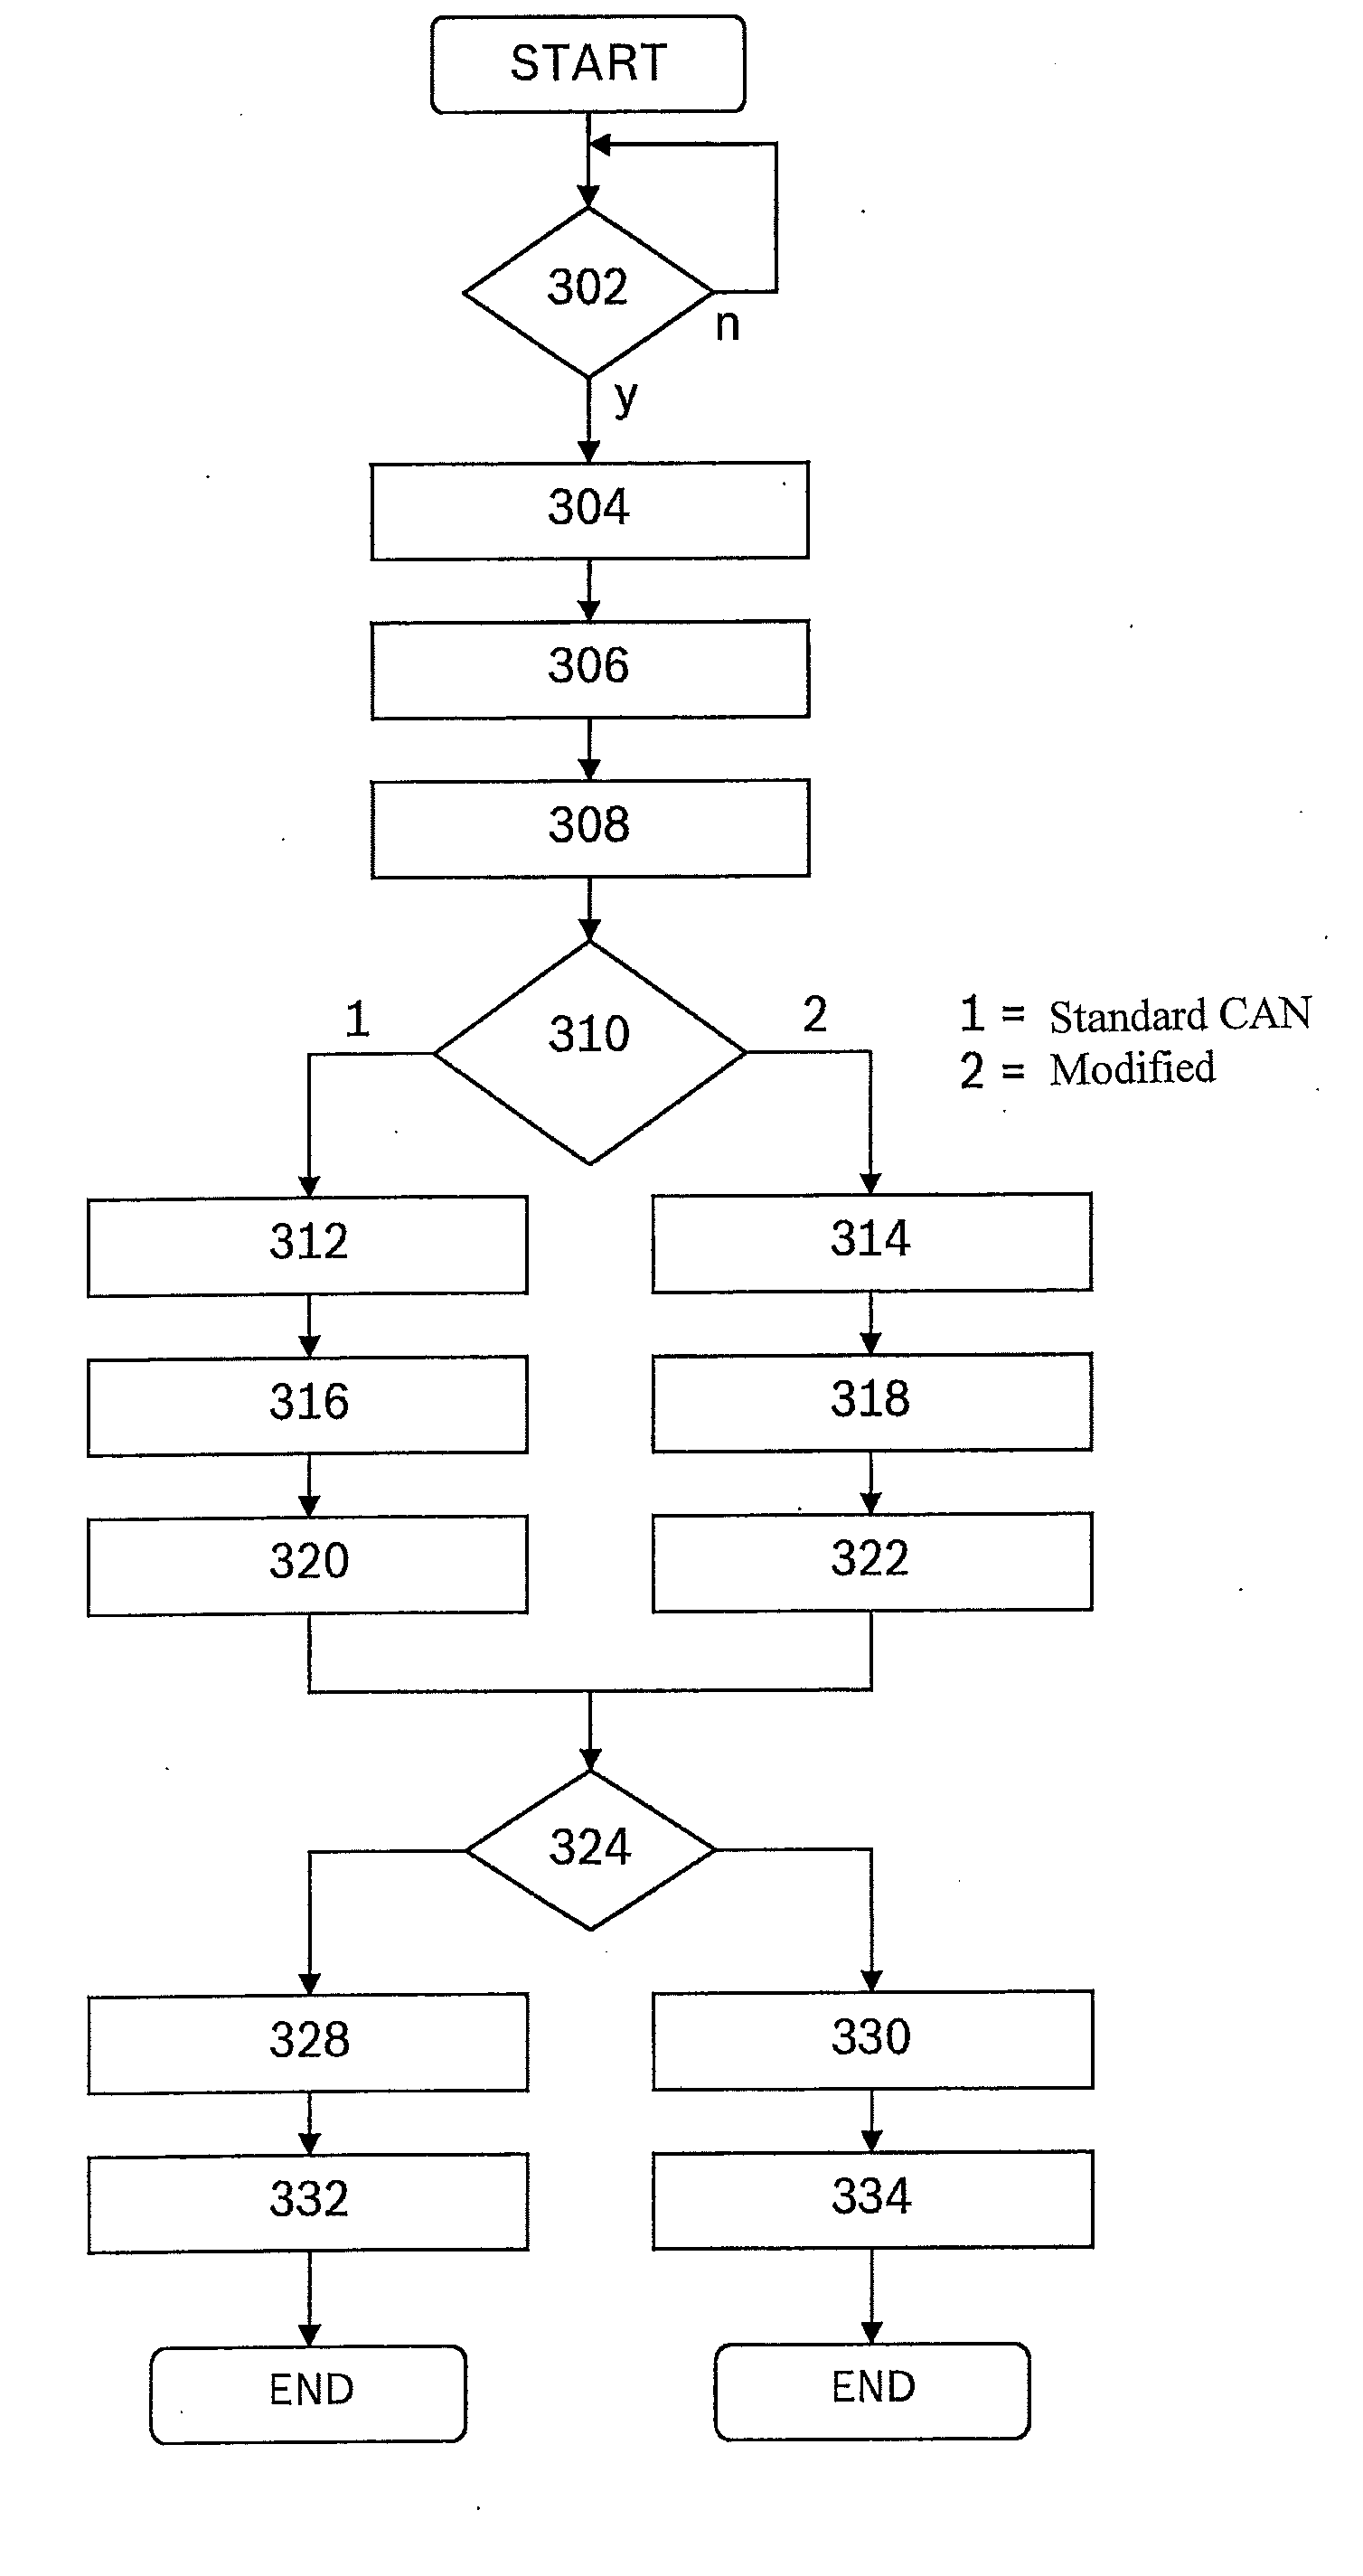 Method and device for improving the data transmission security in a serial data transmission having flexible message size